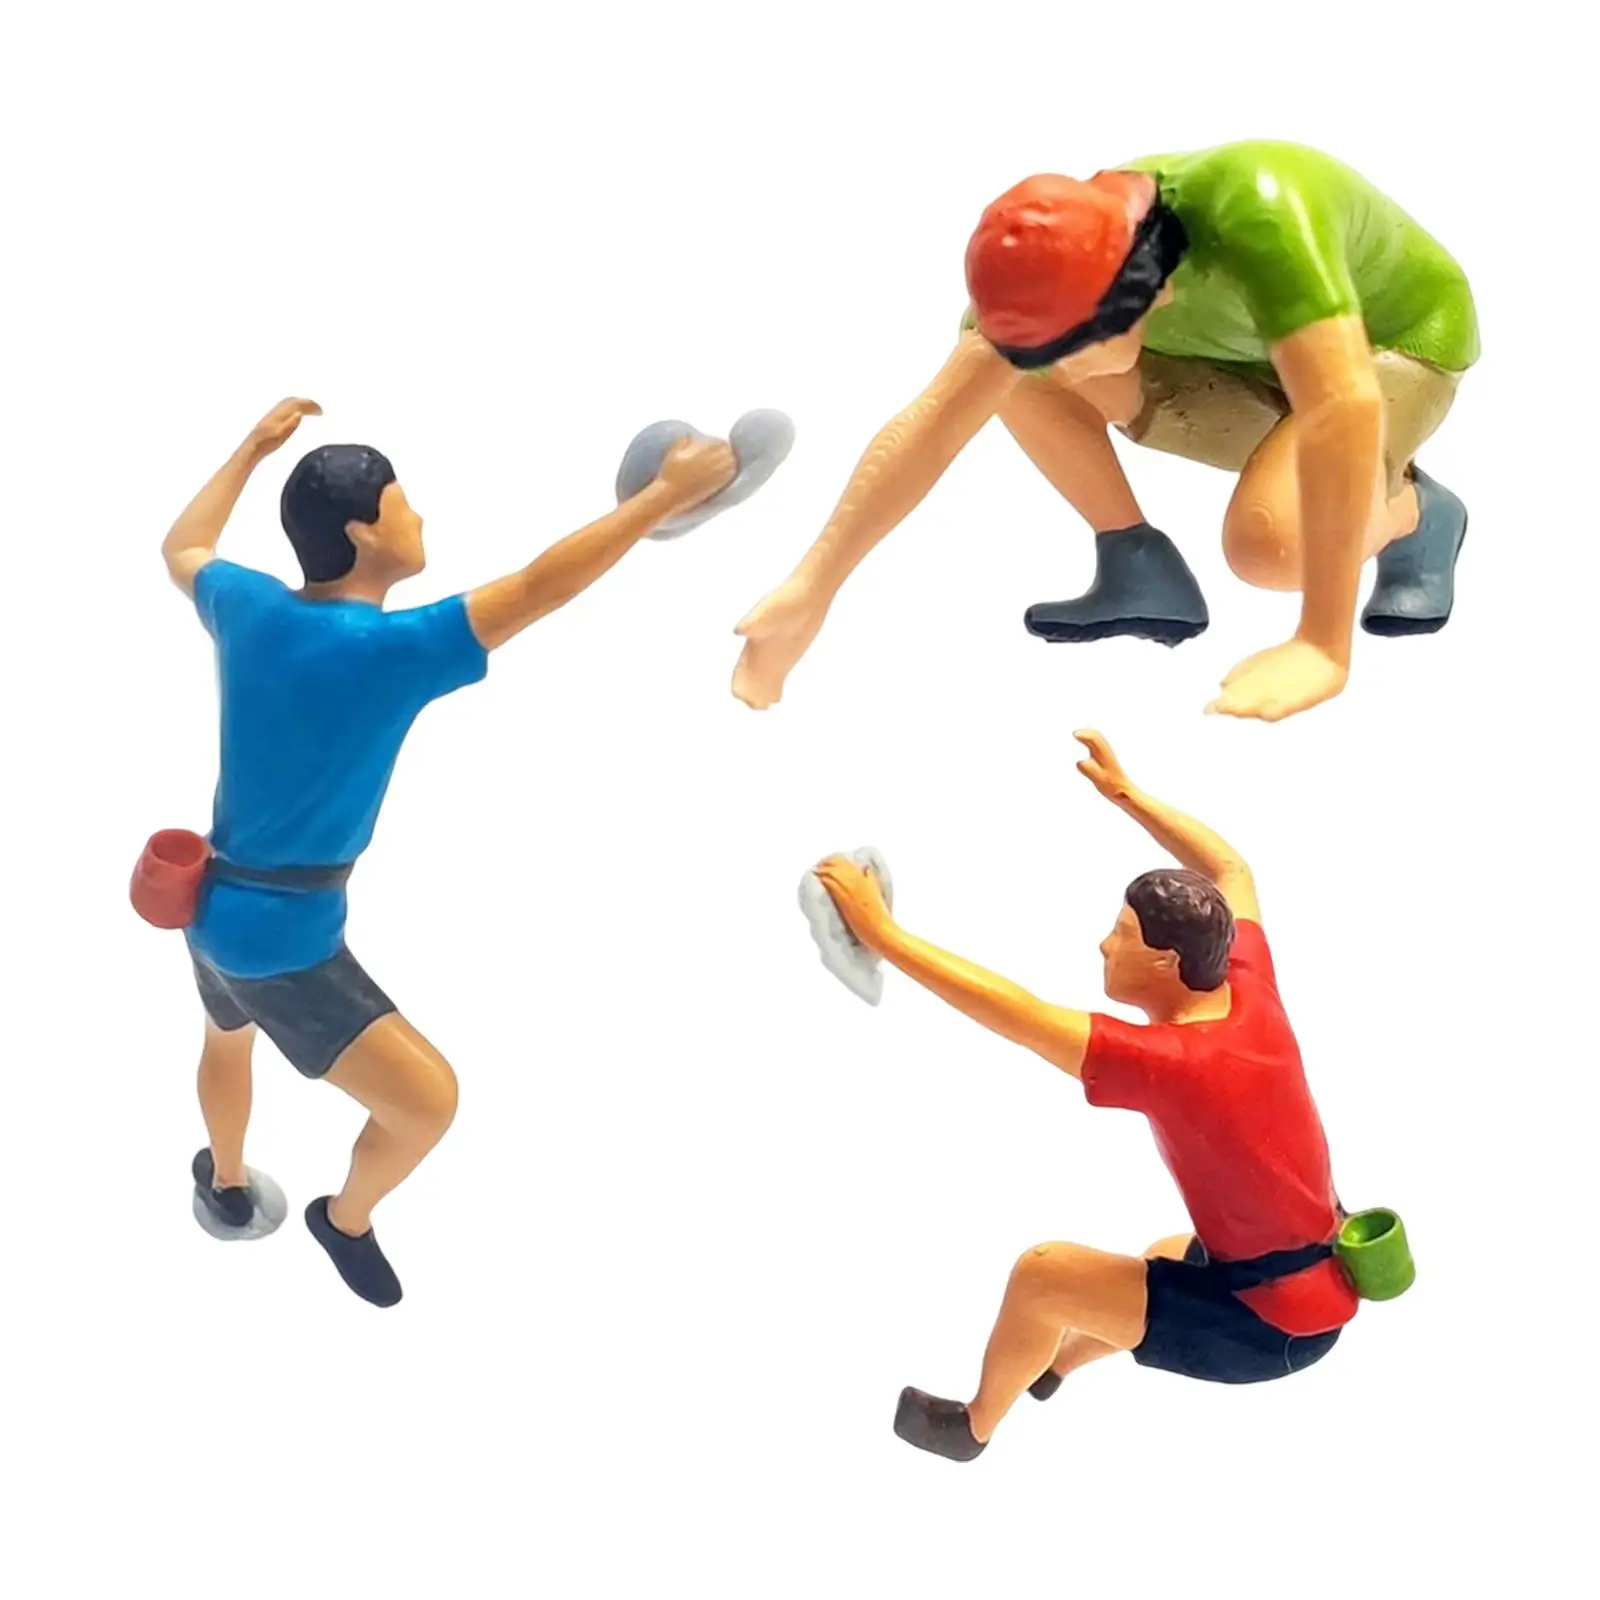 3Pcs Hand Painted 1:87 Rock Climbing Figure People Model Collections Movie Props